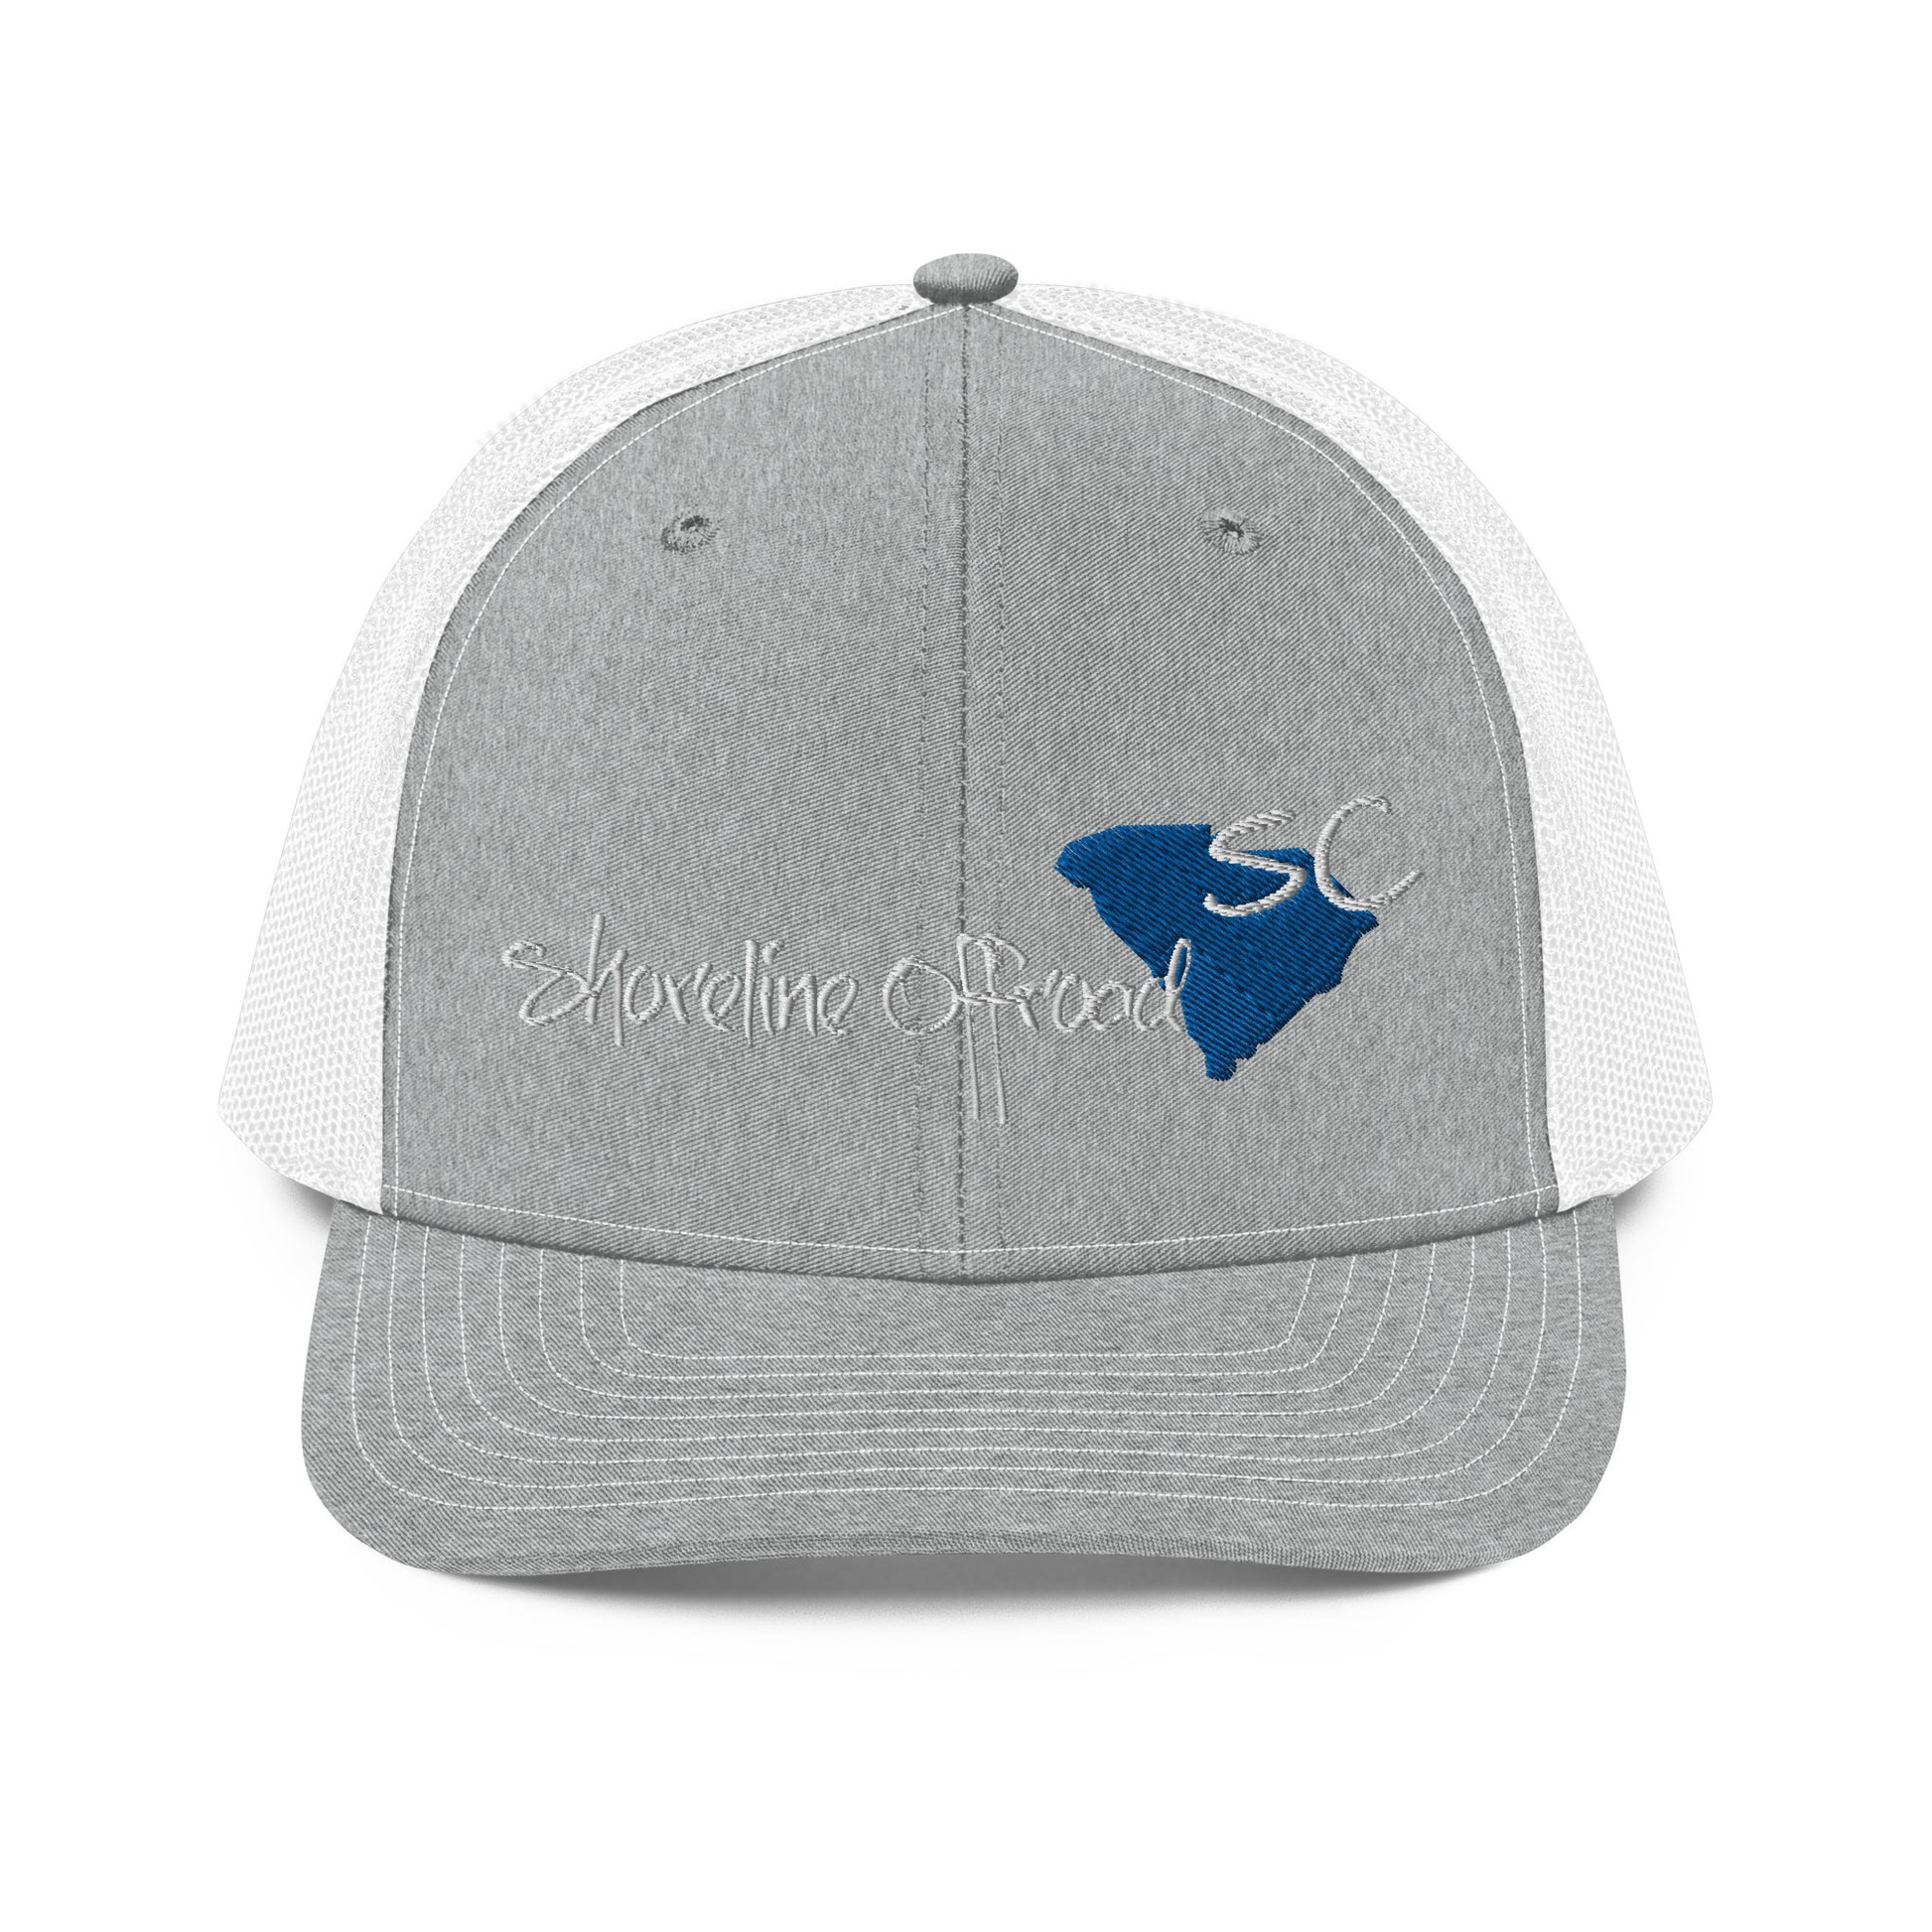 a gray and white trucker hat with a blue and white outline of the state